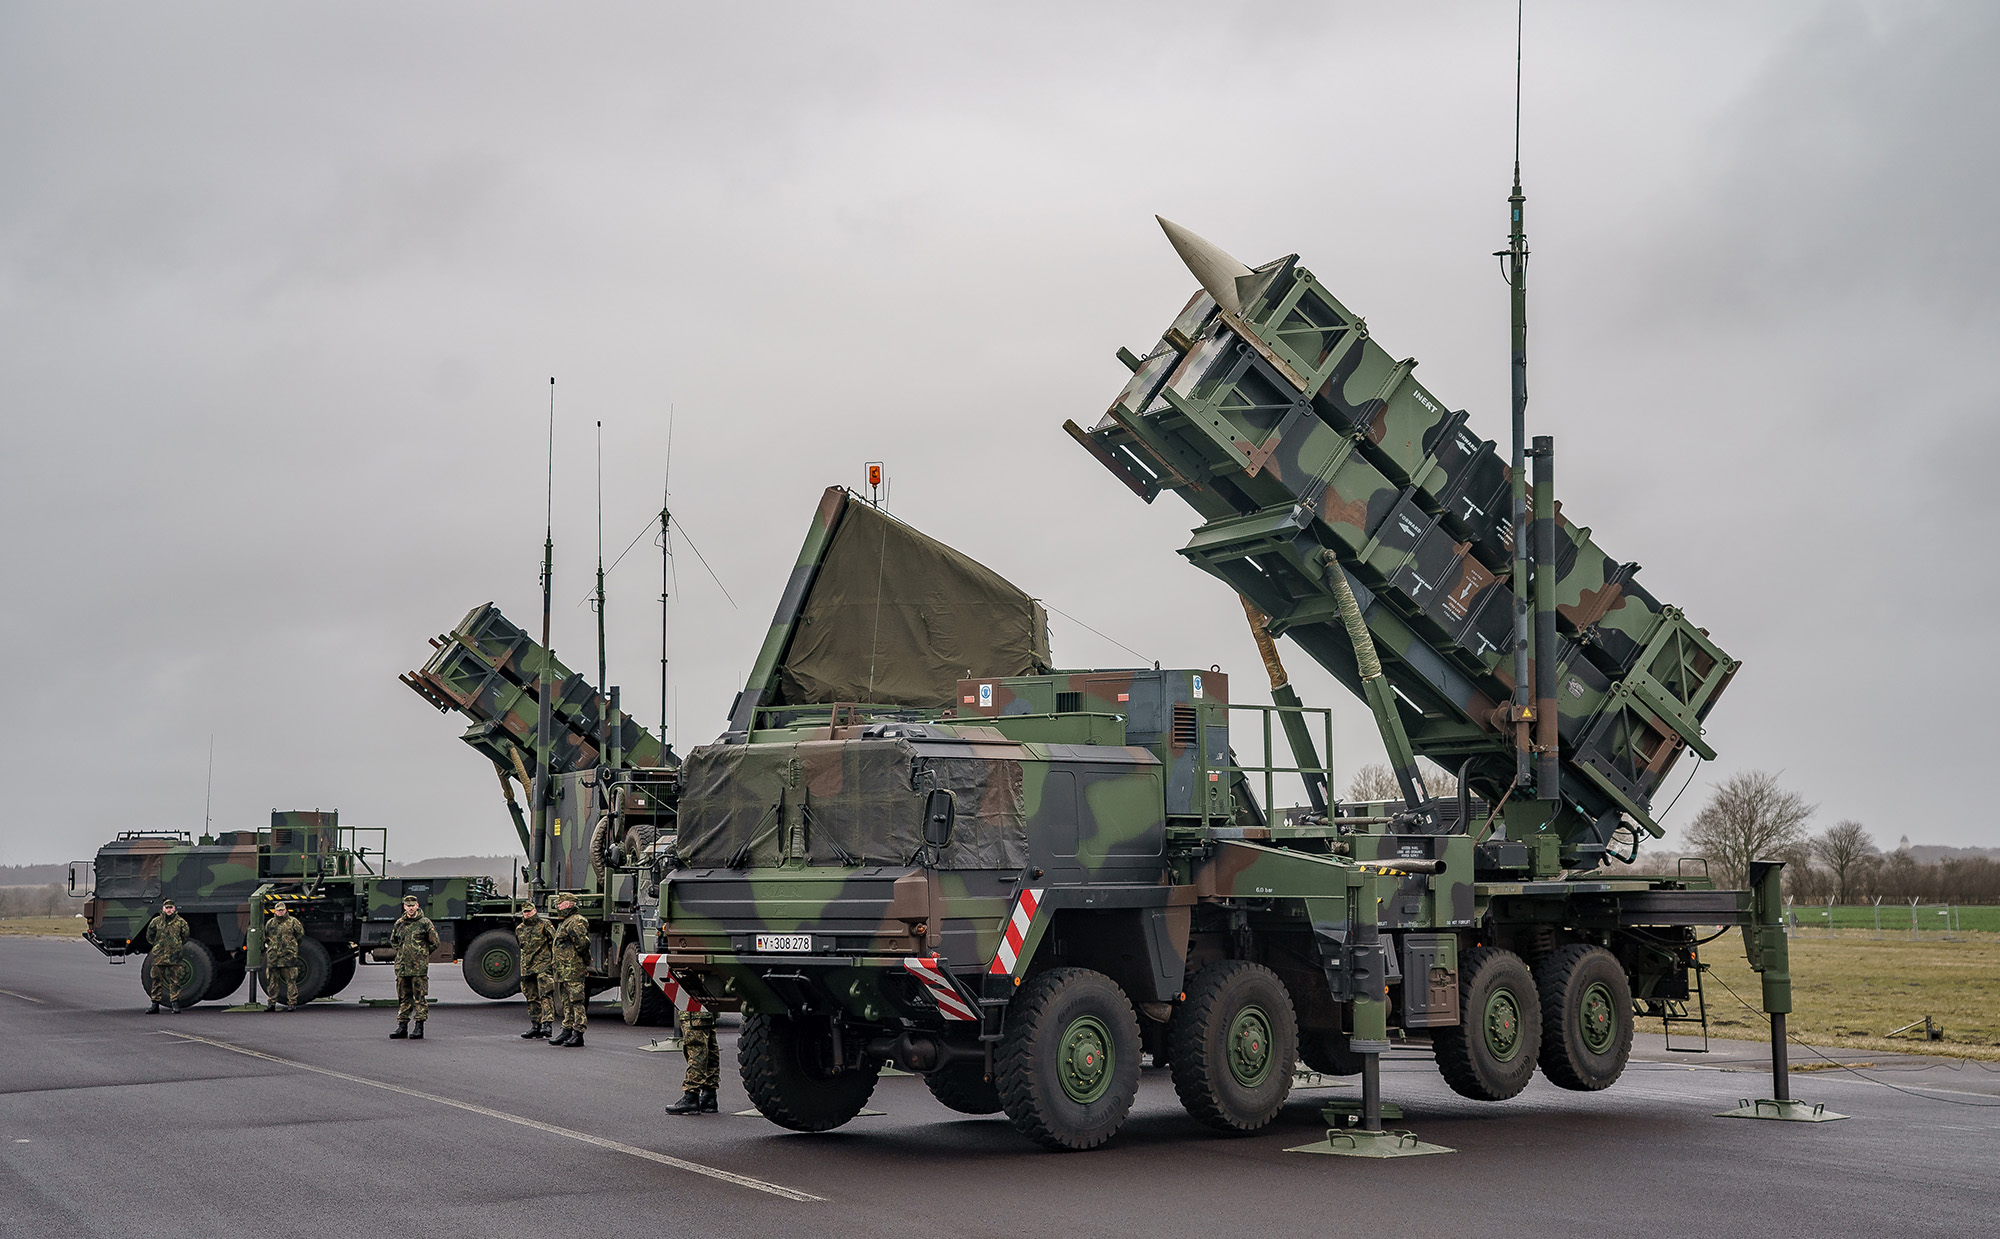 Patriot anti-aircraft missile systems of the Bundeswehr's anti-aircraft missile squadron 1 stand on the airfield of Schwesing military airport, Germany, on March 17.